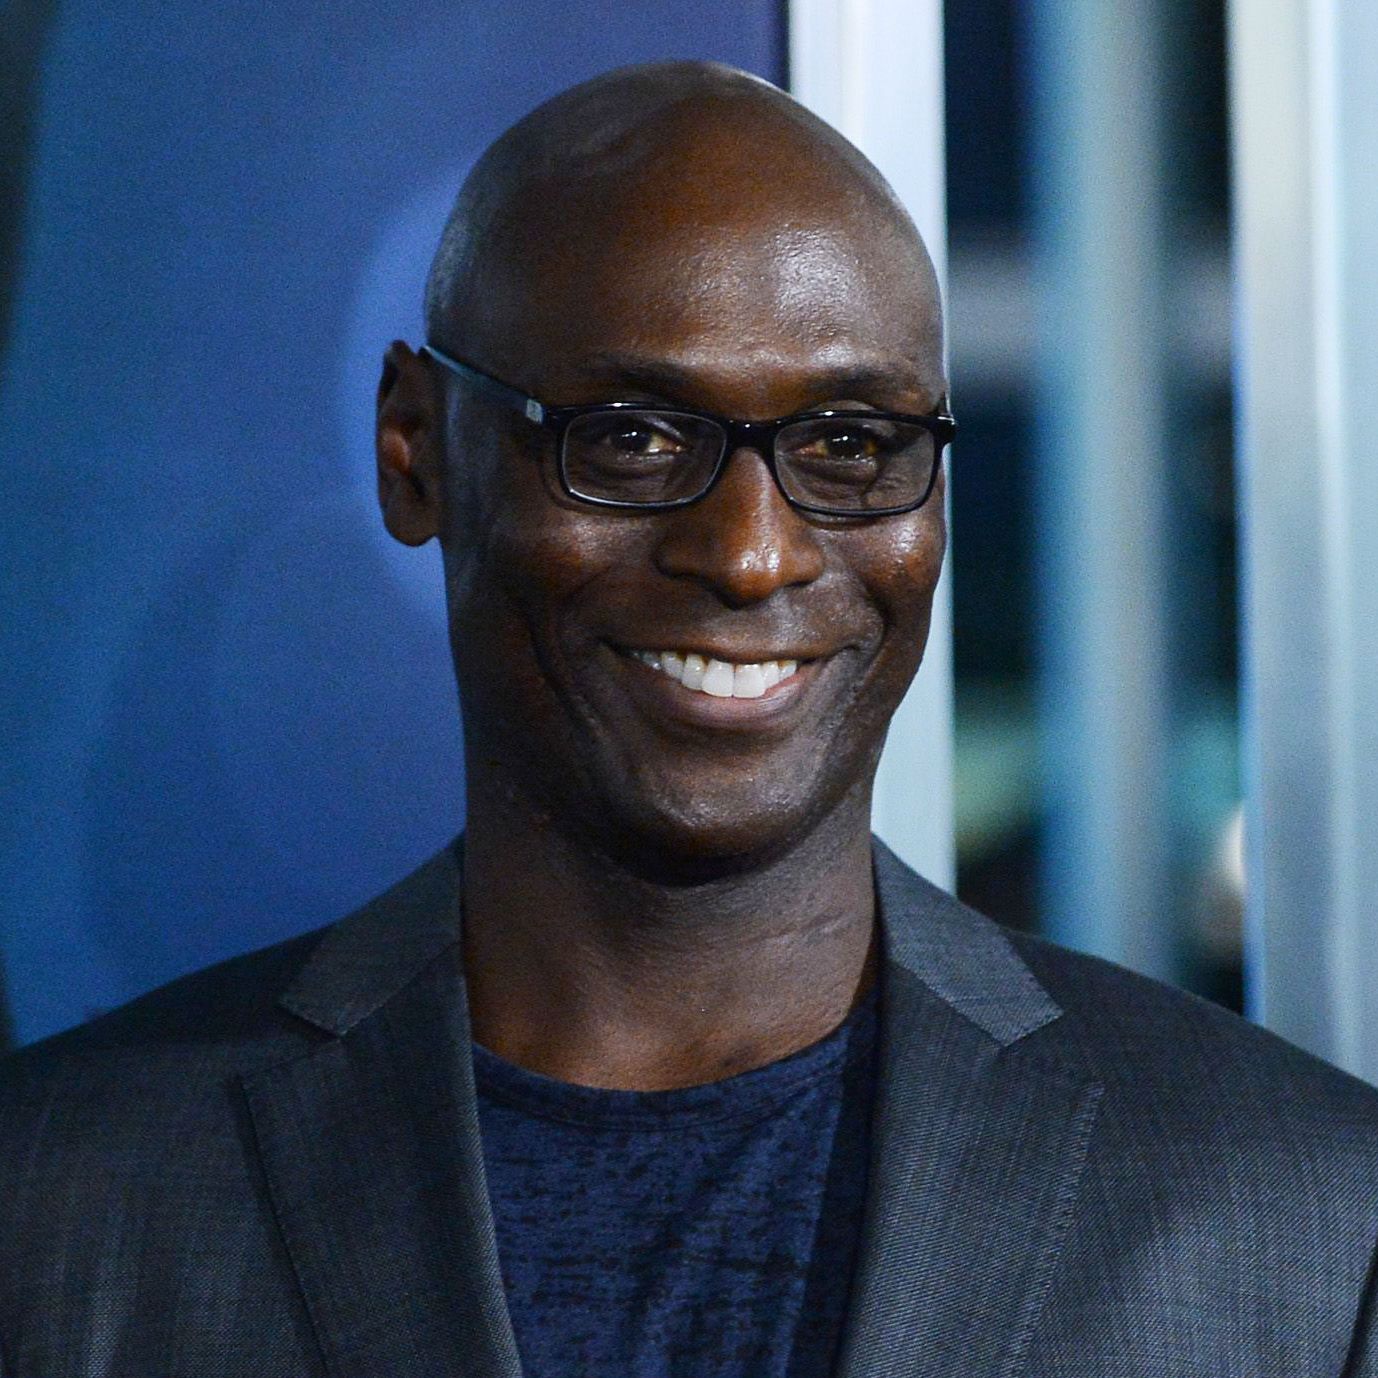 Lance Reddick, 'The Wire' and 'John Wick' star, dies at 60